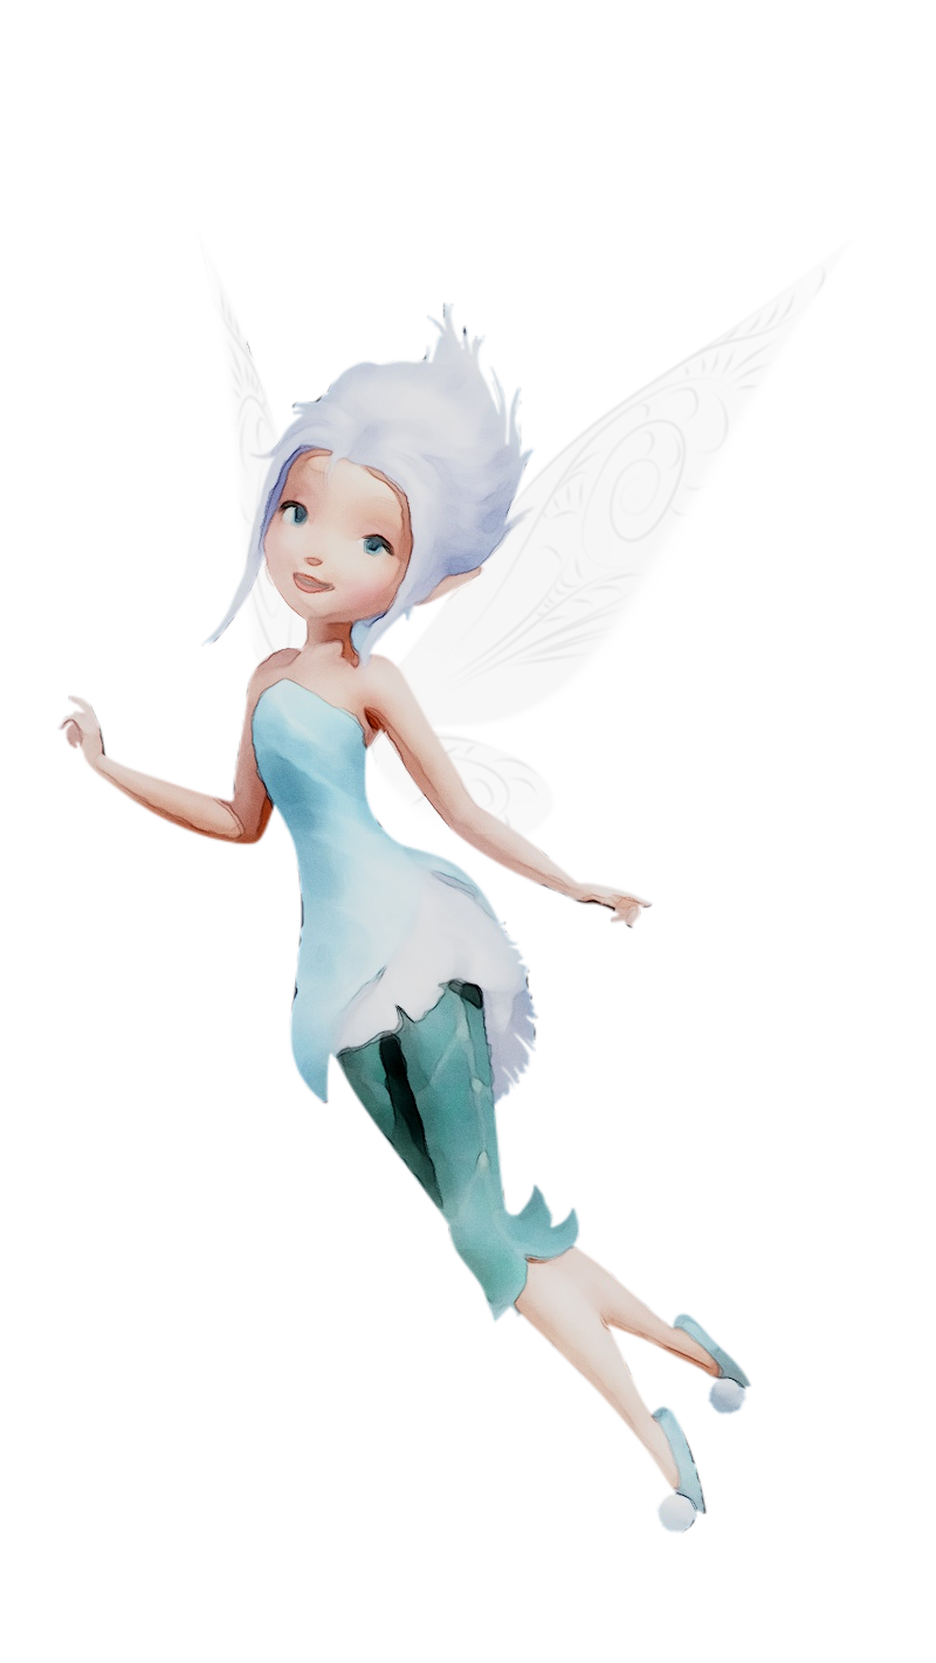 Fairy Figurine Turquoise Free Transparent Image HD Clipart